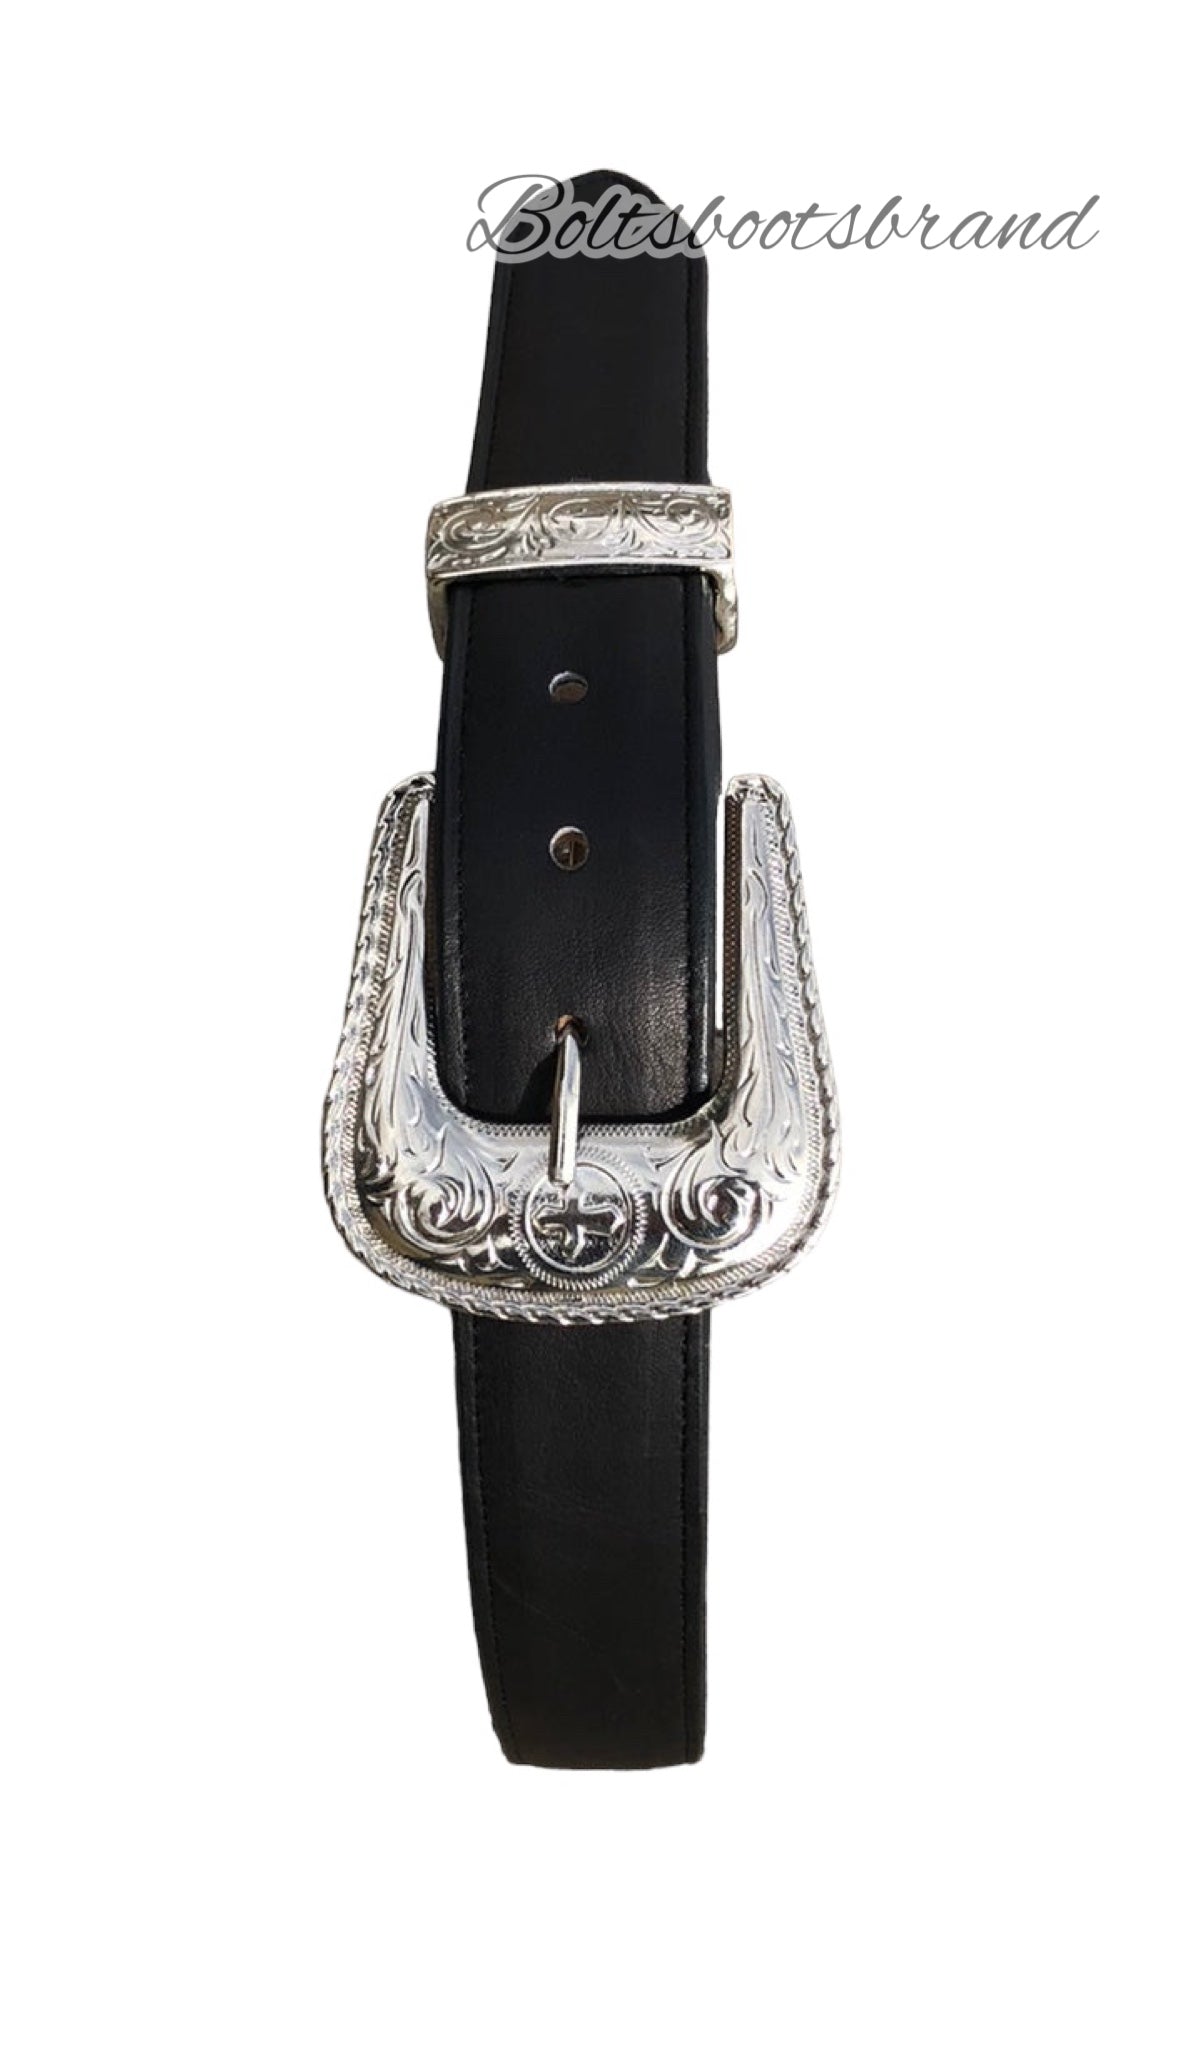 Leather country belt by Boltsbootsbrand